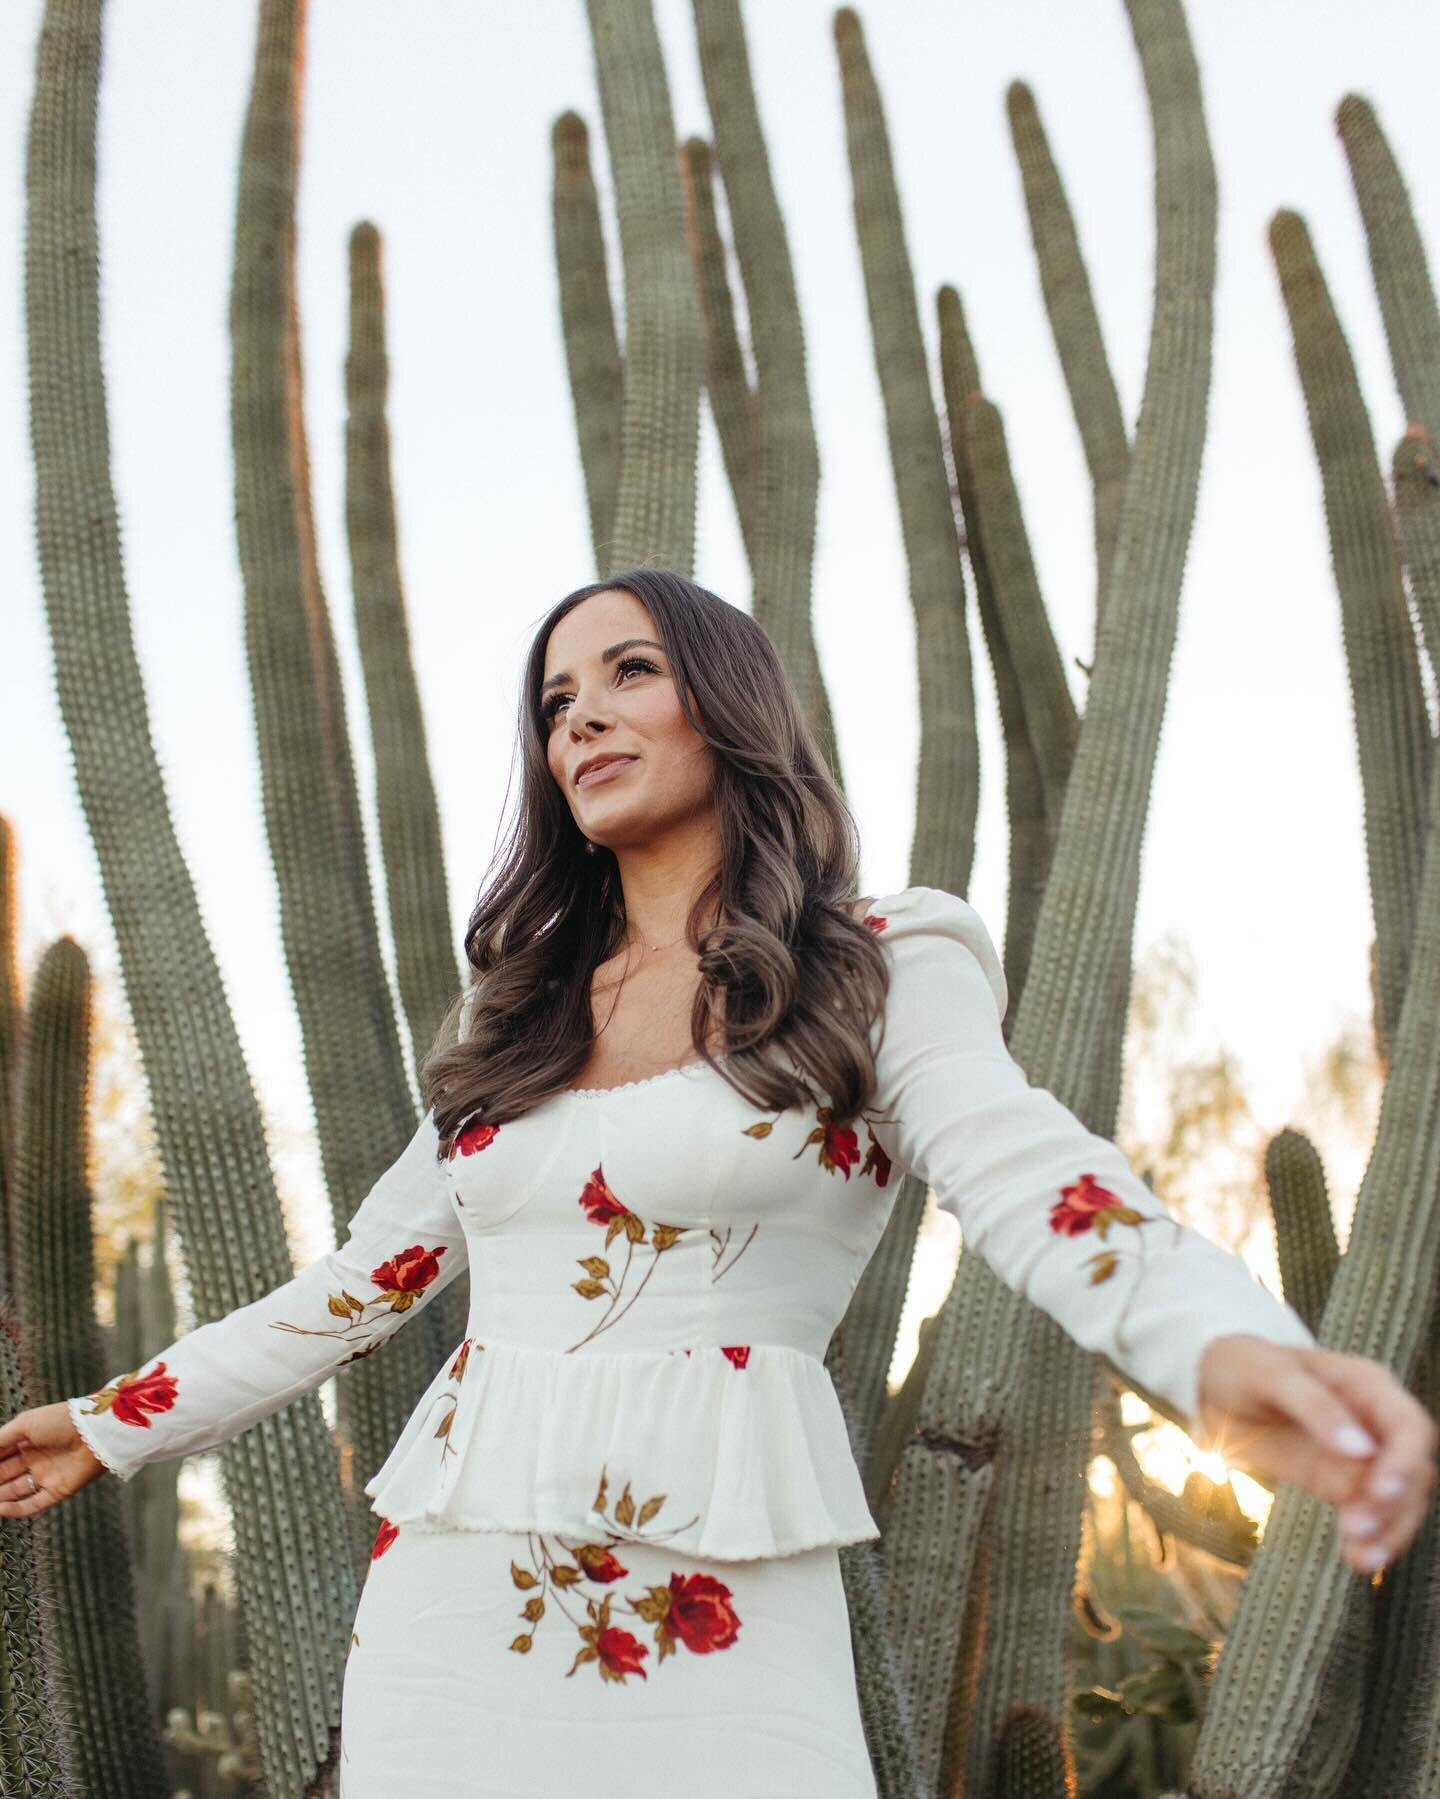 One of our favorite seasons is approaching and it&rsquo;s senior season. Email or dm us to schedule yours xx 
.
.
.
.
.
#seniors #seniorphotos #seniorsession #seniorphotographer #azphotographer #azseniors #asu #gcu #botanicalgardens #cactus #masters 